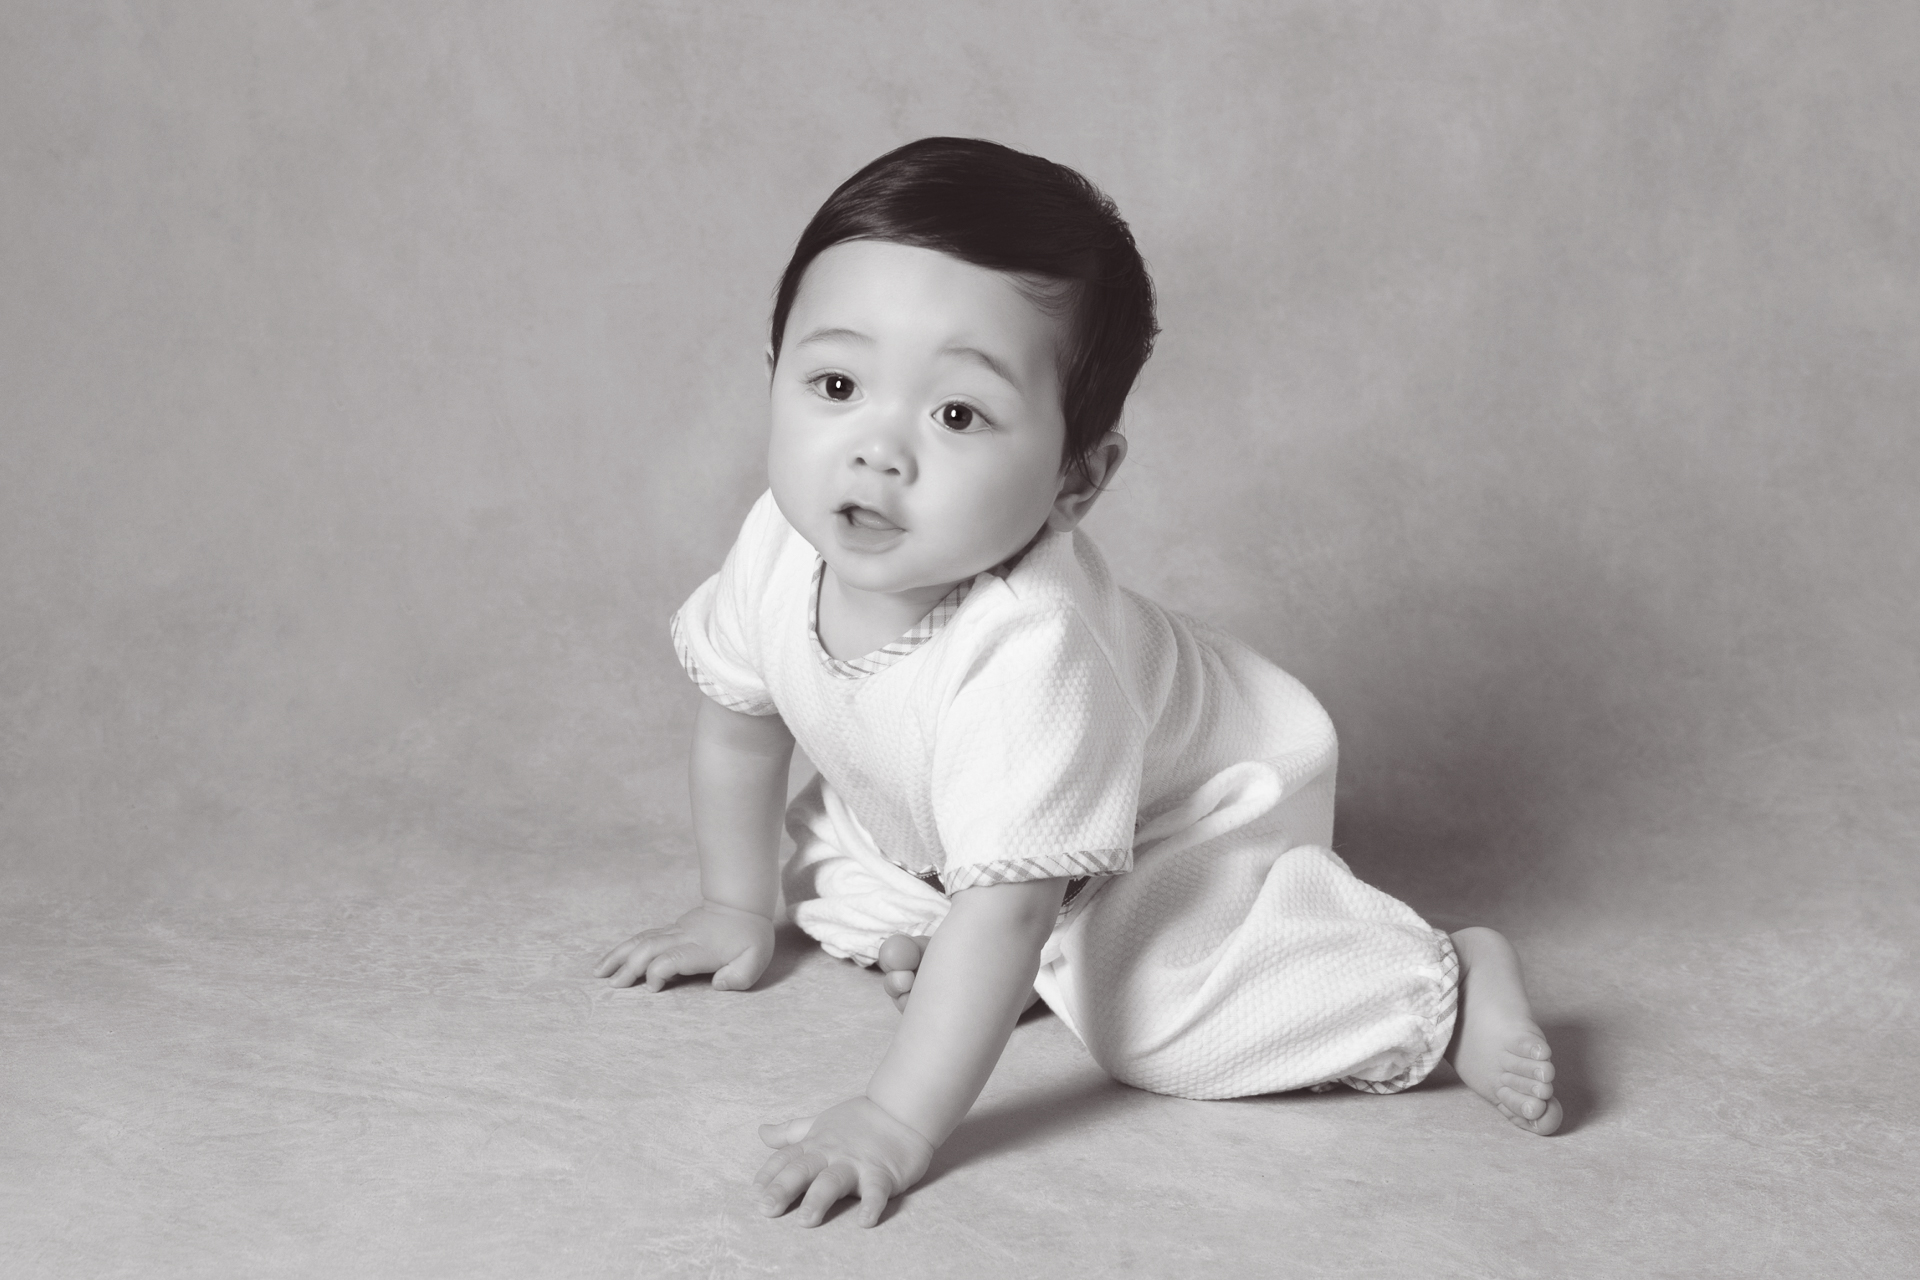 One year old baby boy posing indoors, black and white backdrop